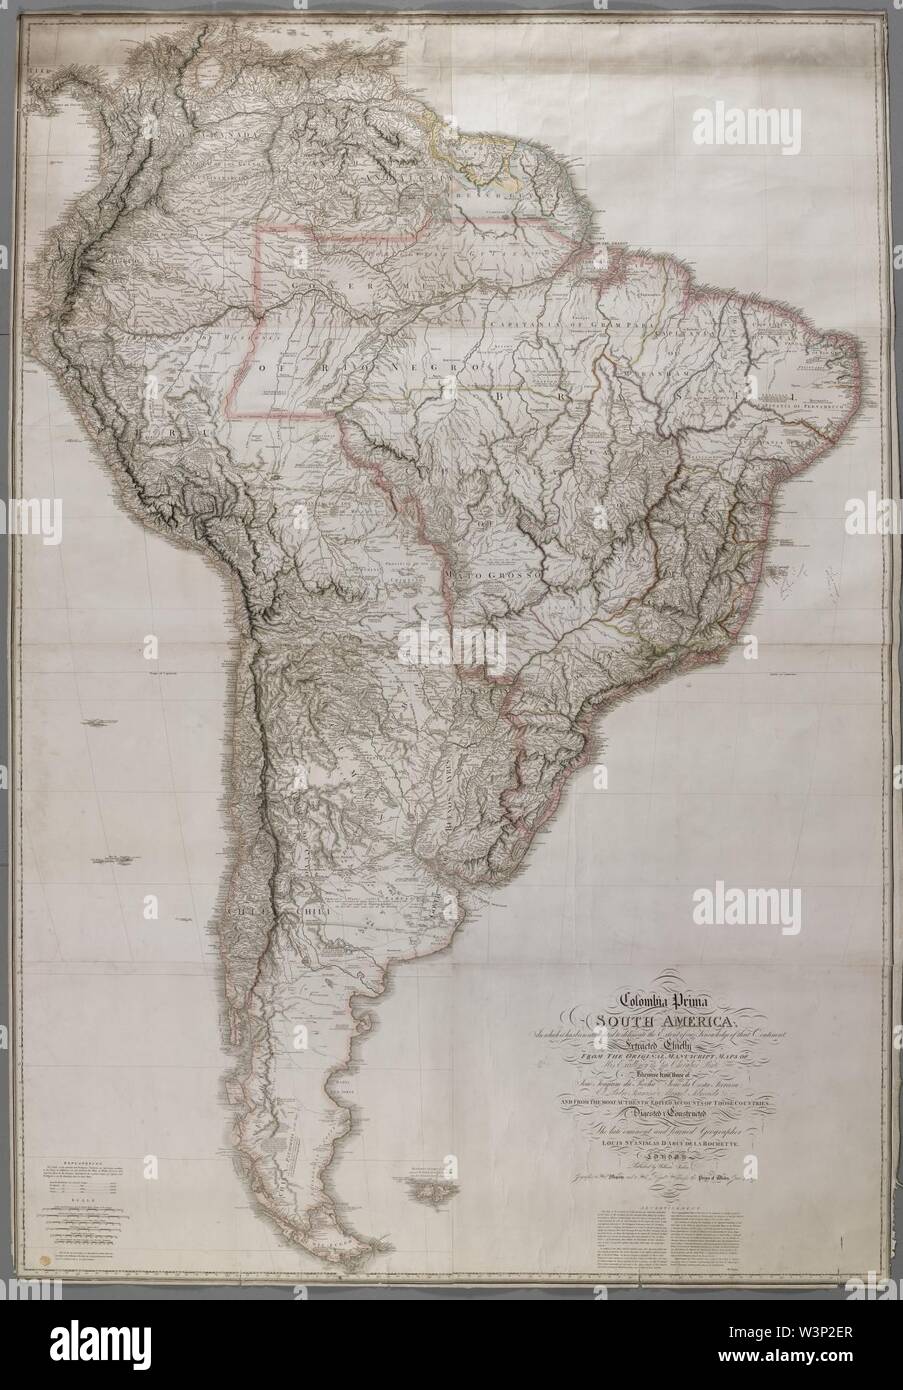 Colombia Prima OR SOUTH AMERICA, In which it has been attempted to delineate the Extent of our Knowledge of that Continent - L. Delarochette, 1807 - BL Maps K.Top.124.14.2 TAB.END (BLL01018640974). Stock Photo